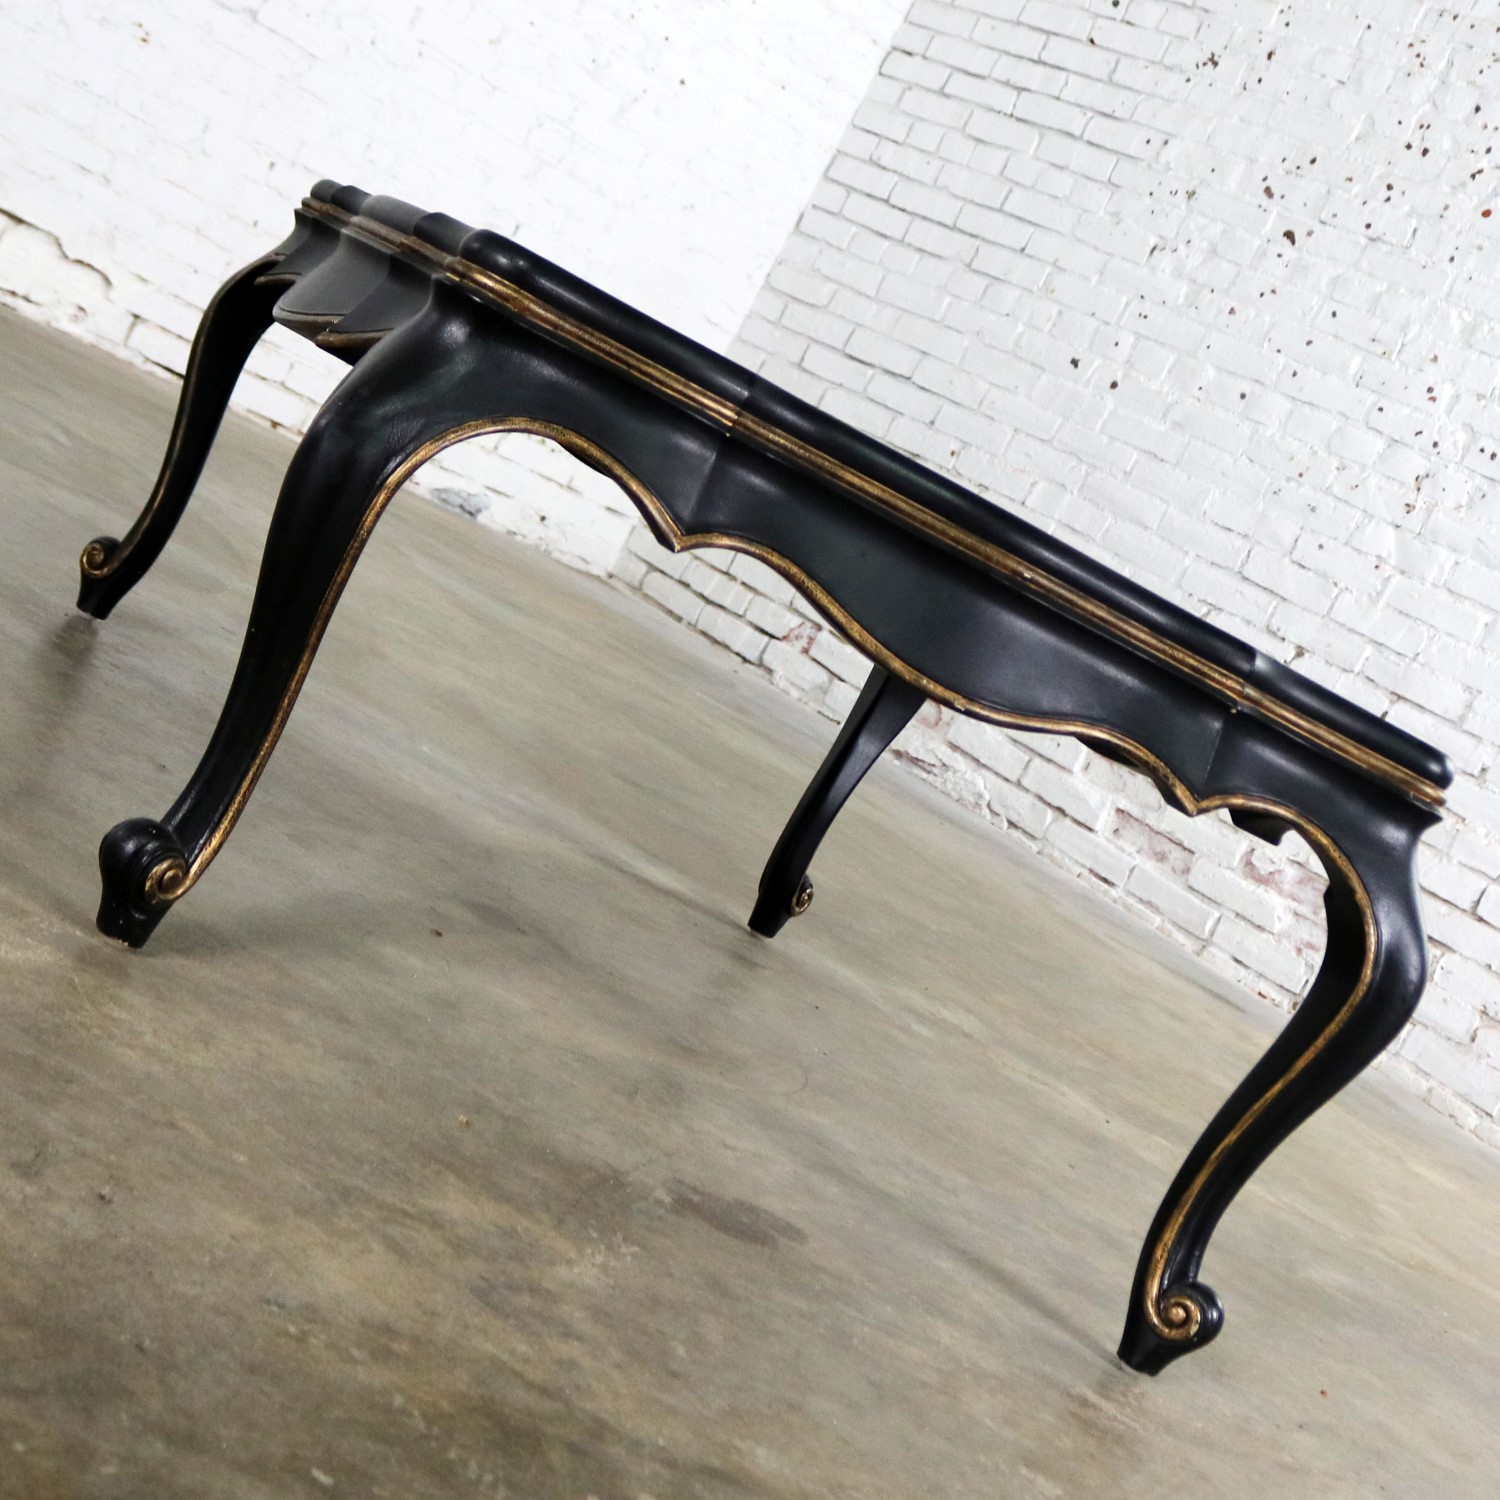 Louis XV Style Black Coffee Table with Gilt Chinoiserie Details